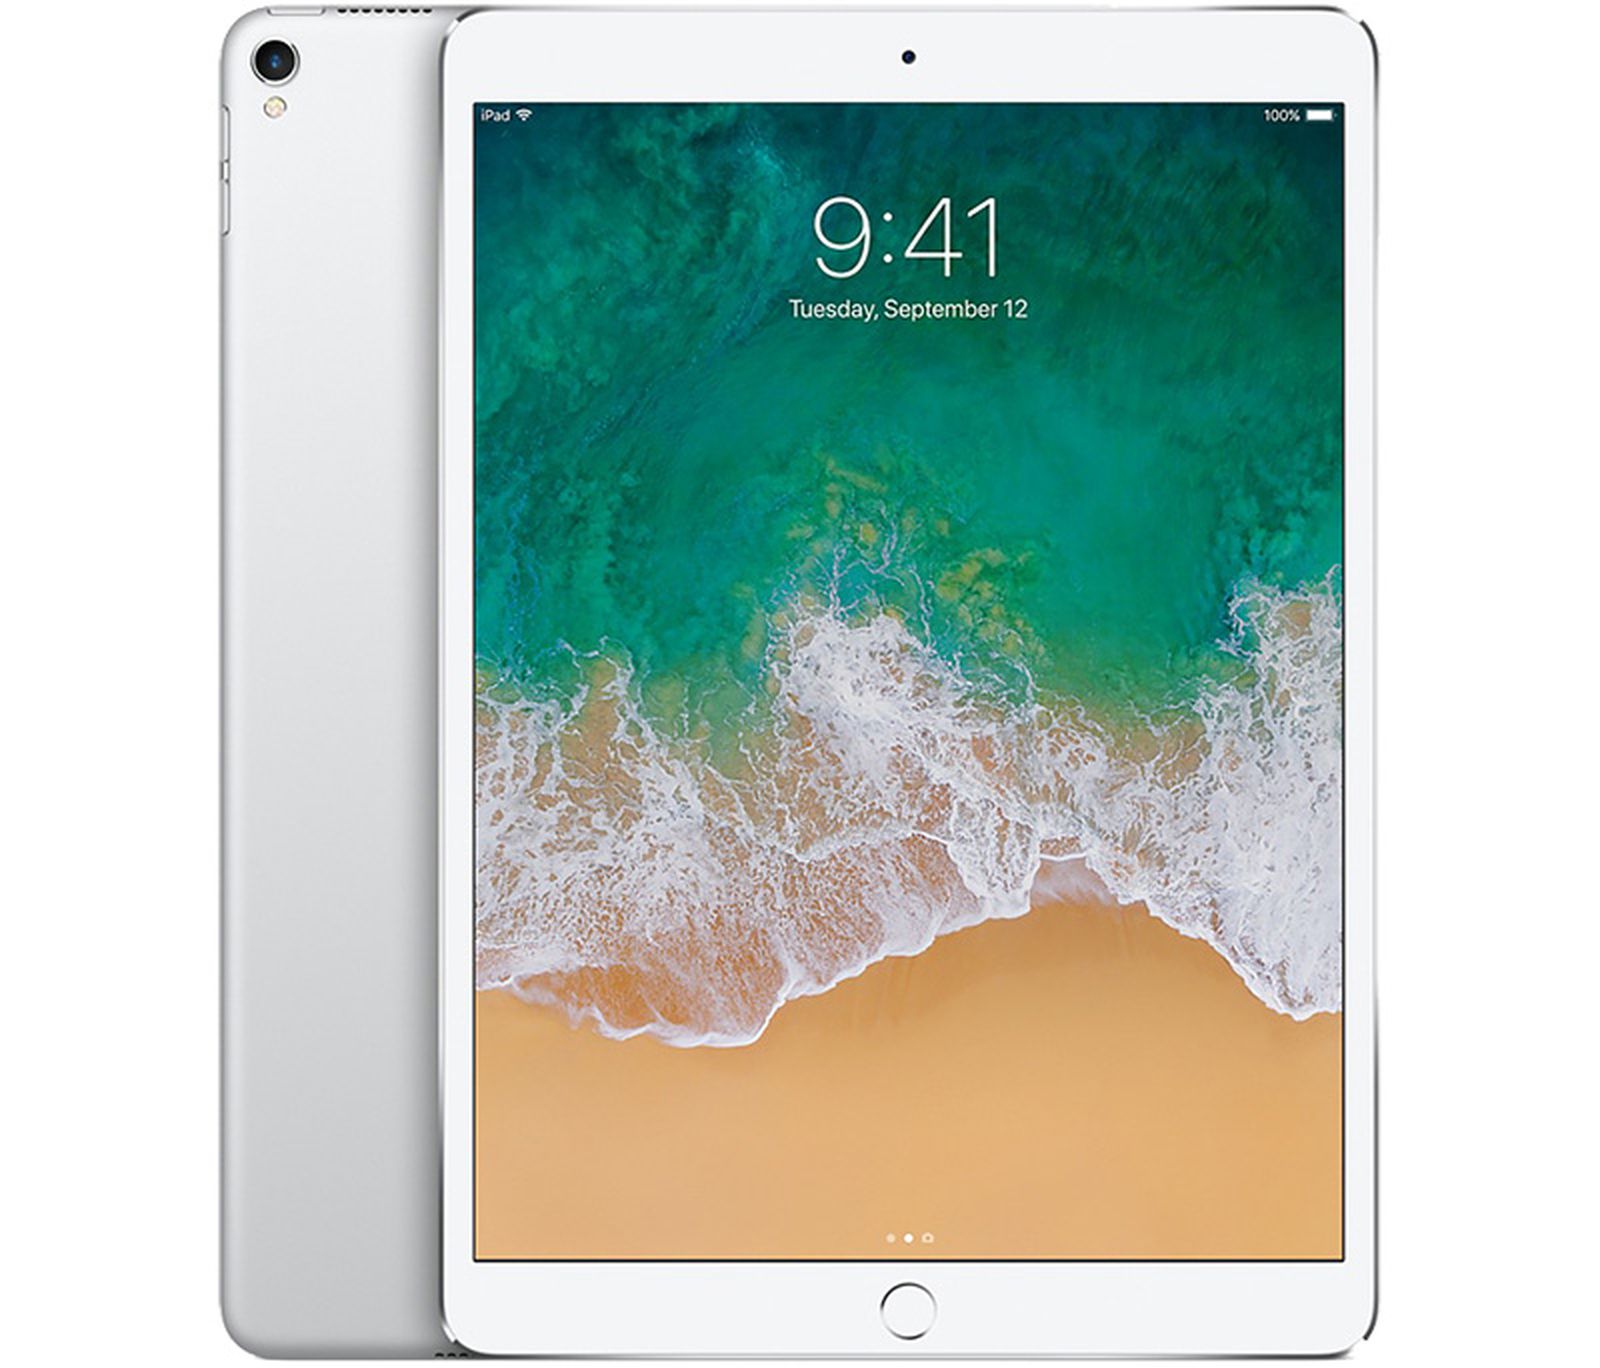 Apple Planning Both 'iPad 7' and All-New 10.5-Inch iPad According to Proven Leaker - MacRumors